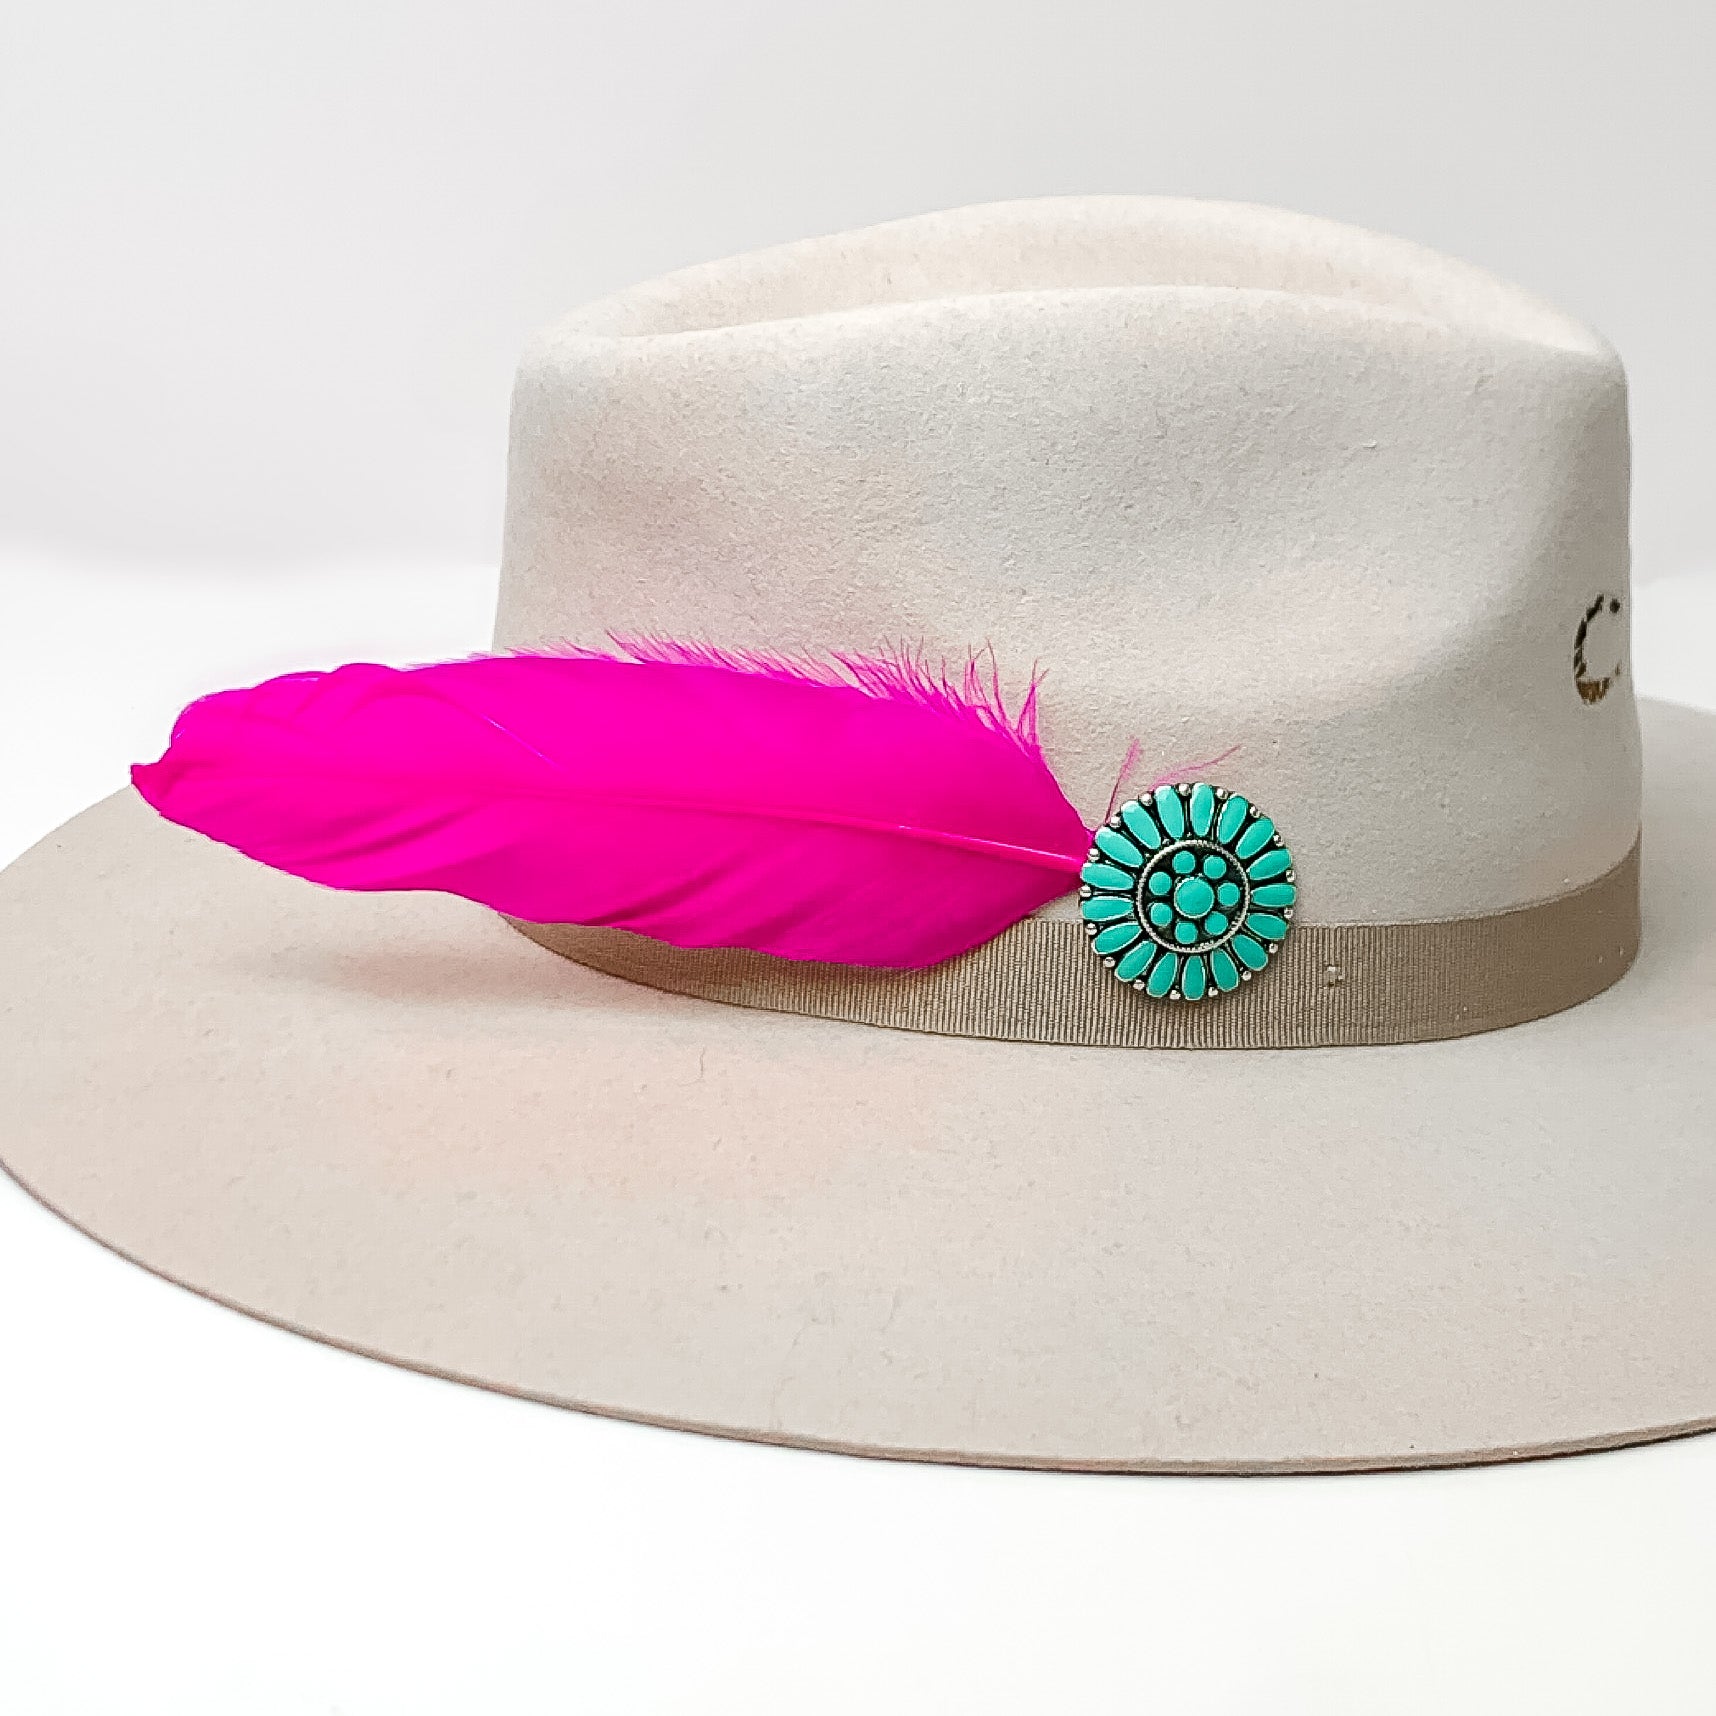 Turquoise Concho and Pink Feather Hat Pin. Pictured on a white background with the pin in a gray/ brown hat.